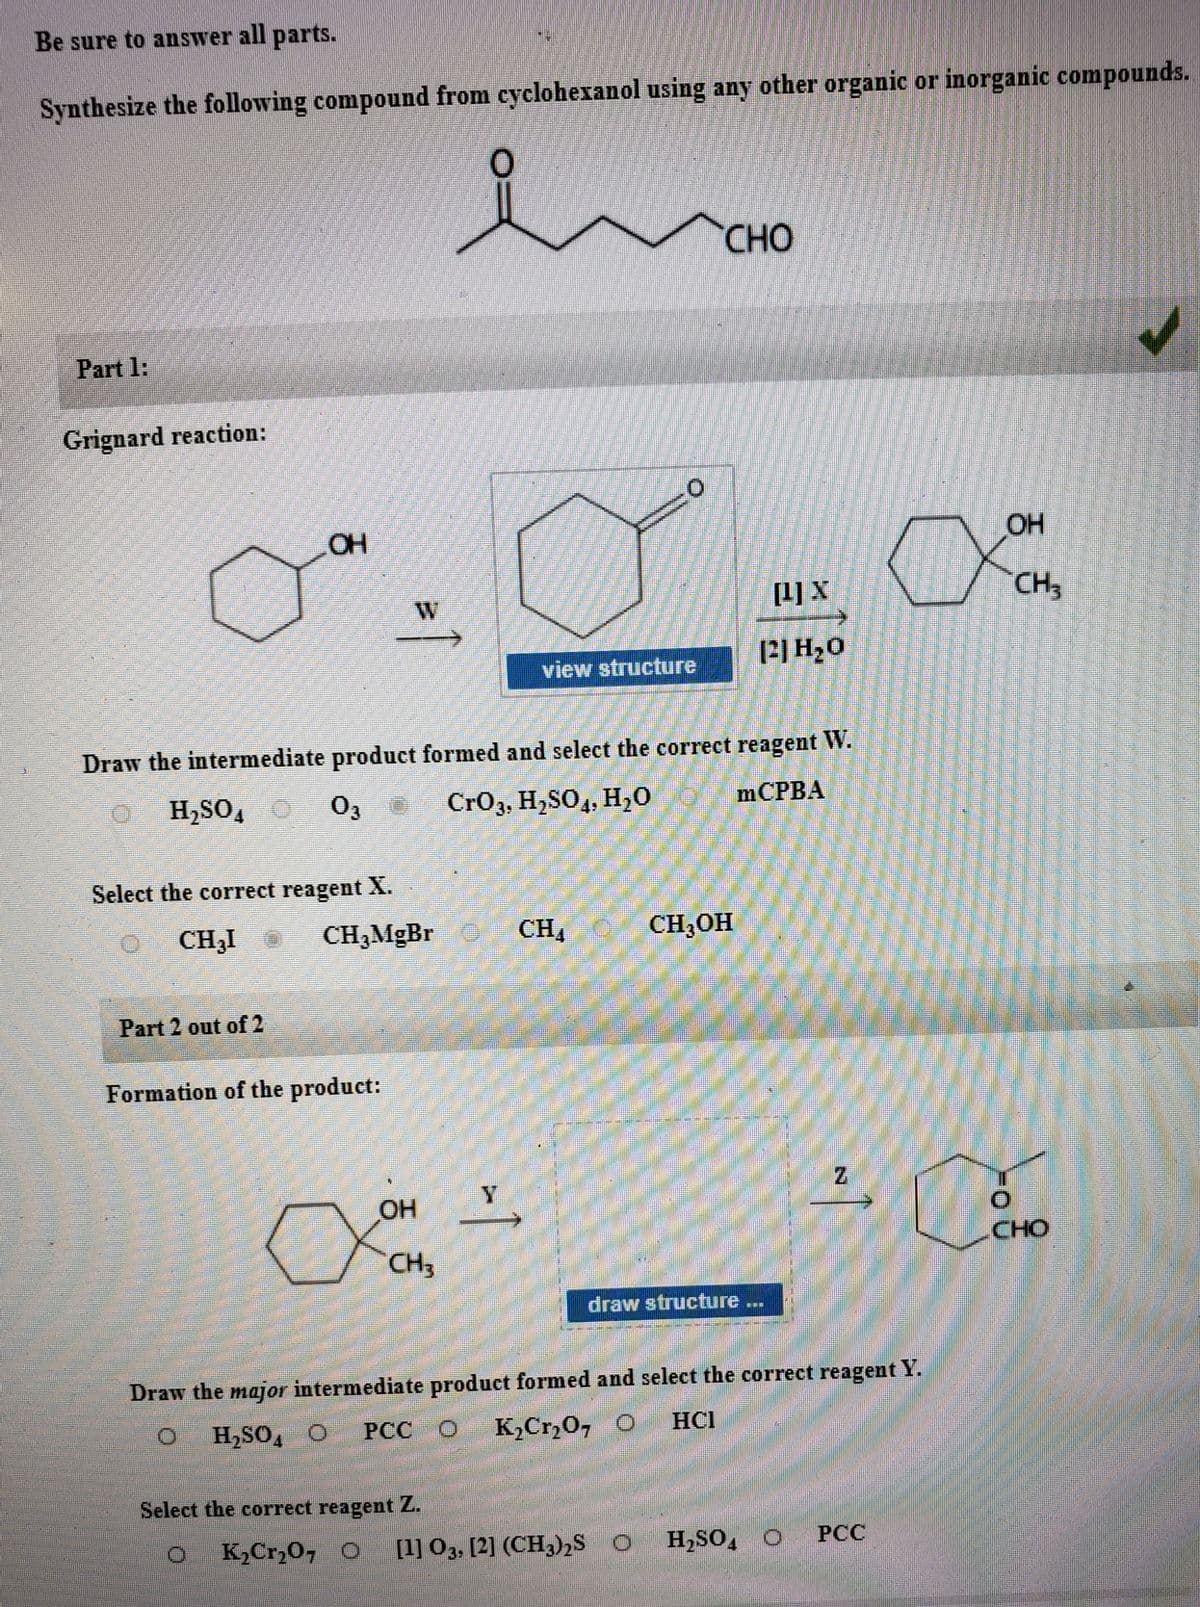 Be sure to answer all parts.
Synthesize the following compound from cyclohexanol using any other organic or inorganic compounds.
CHO
Part 1:
Grignard reaction:
OH
[1] X
CH3
P]H20
view structure
Draw the intermediate product formed and select the correct reagent W.
H,SO,
O3
Cr03, H,SO4, H,0
MCPBA
Select the correct reagent X.
.
CH3I
CH,MgBr
CH
CH;OH
Part 2 out of 2
Formation of the product:
HO
CHO
CH3
draw structure ...
Draw the major intermediate product formed and select the correct reagent Y.
H,SO, O
PCC O
K,Cr,0, O
HCI
Select the correct reagent Z.
K2Cr,0, O
[1] O3, [2] (CH3)2S O
H,SO, O
PCC
